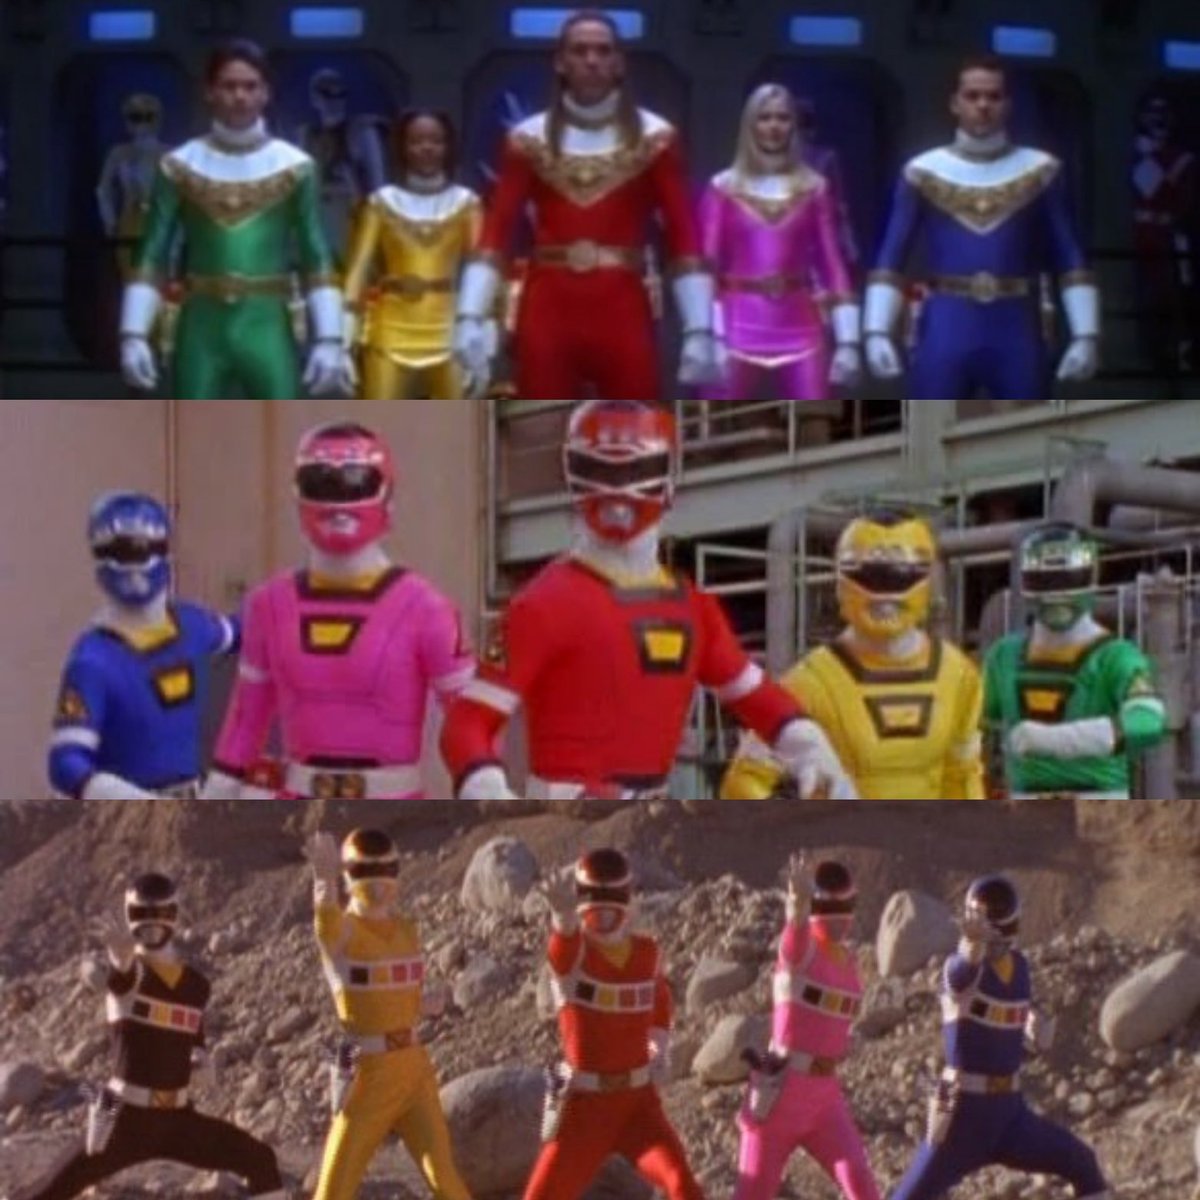 The transitions from each of these seasons are truly magical. ⚡
.
.
.
.
.
#PowerRangersZeo #ZeoRangers #GoZeo #ZeoPower #PowerRangersTurbo #TurboRangers #ShiftIntoTurbo #PowerRangersInSpace #SpaceRangers #RangersInSpace #PowerRangers #Nostalgic #90s #90sPowerRangers